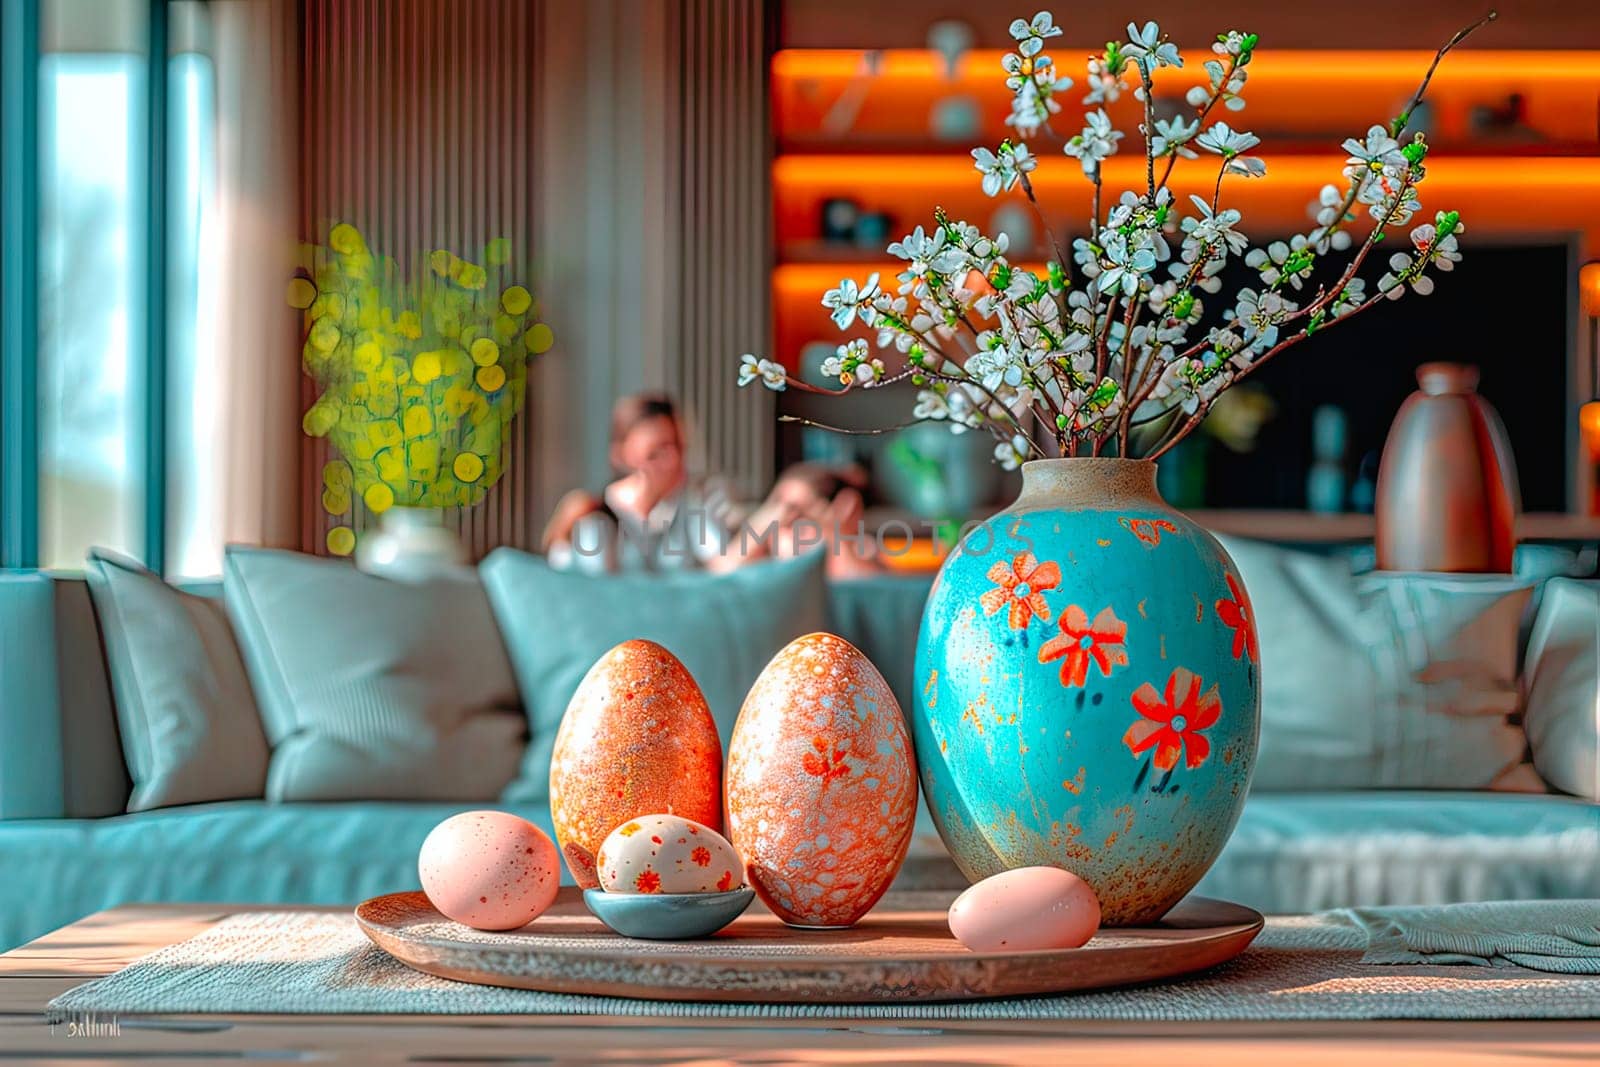 Twigs from a flowering spring tree stand in a blue vase. Easter eggs in various colours and sizes are also on the table. A grey couch with cushions can be seen in the background.